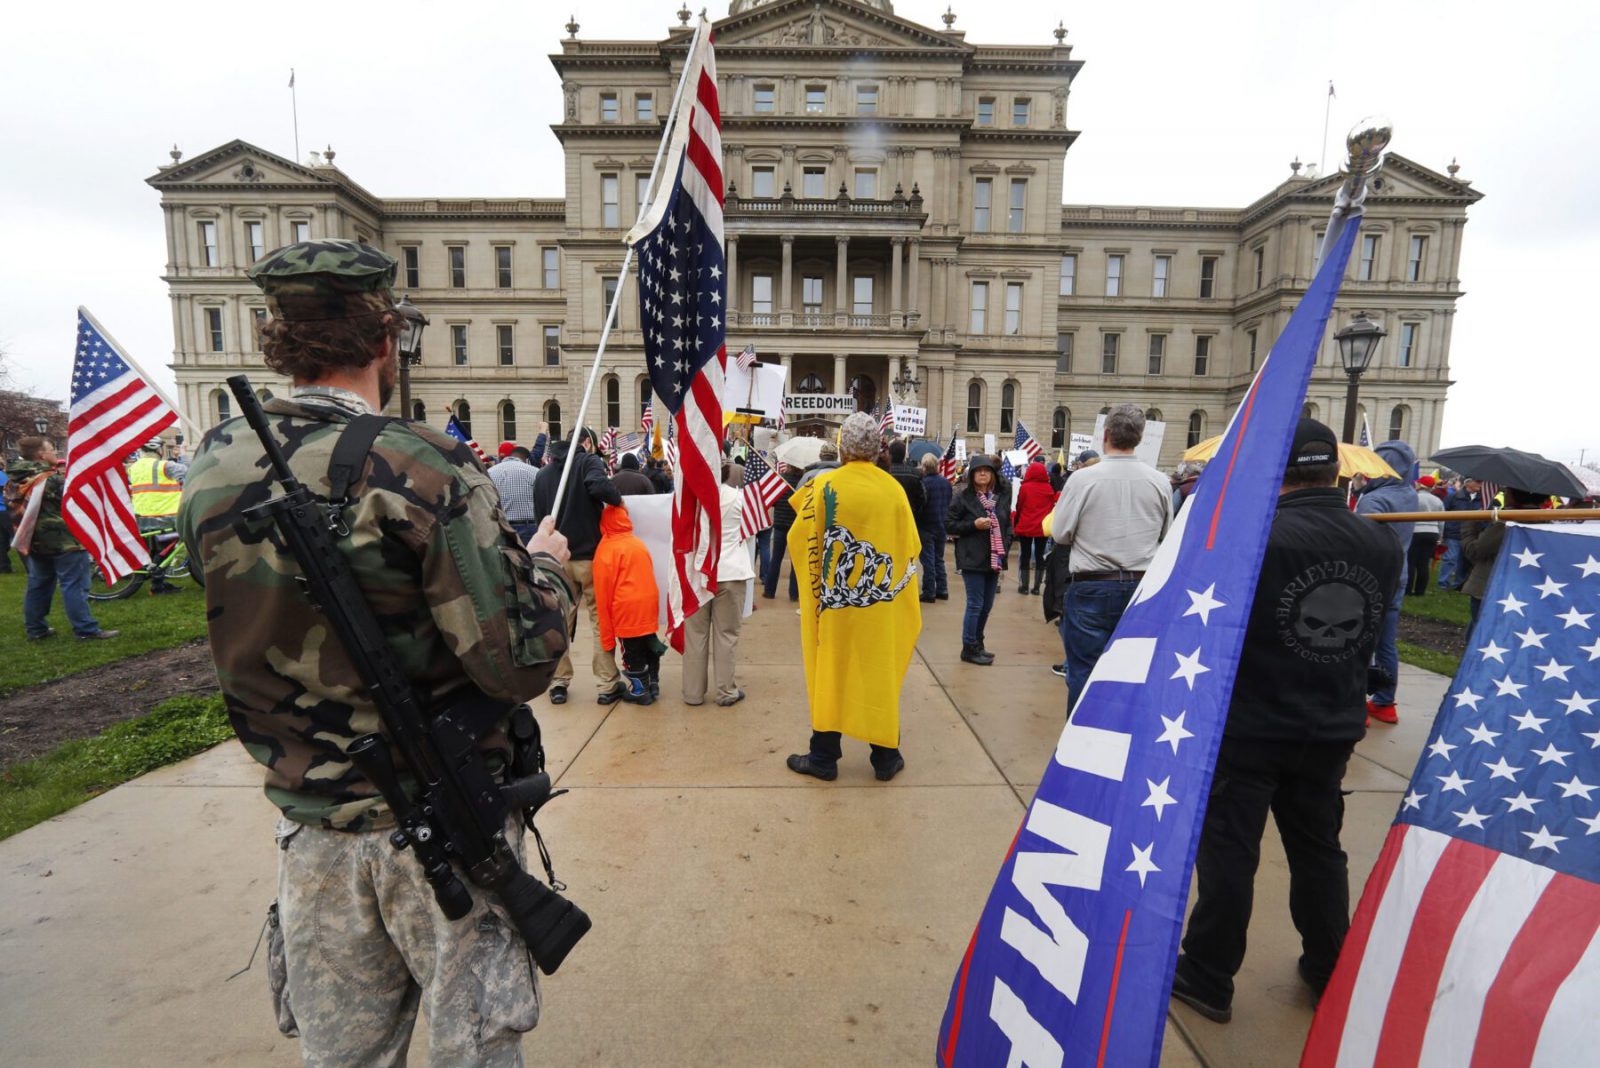 A protester carries his rifle at the State Capitol in Lansing, Mich., Thursday, April 30, 2020. Hoisting American flags and handmade signs, protesters returned to the state Capitol to denounce Gov. Gretchen Whitmer's stay-home order and business restrictions due to COVID-19 while lawmakers met to consider extending her emergency declaration hours before it expires. (AP Photo/Paul Sancya)